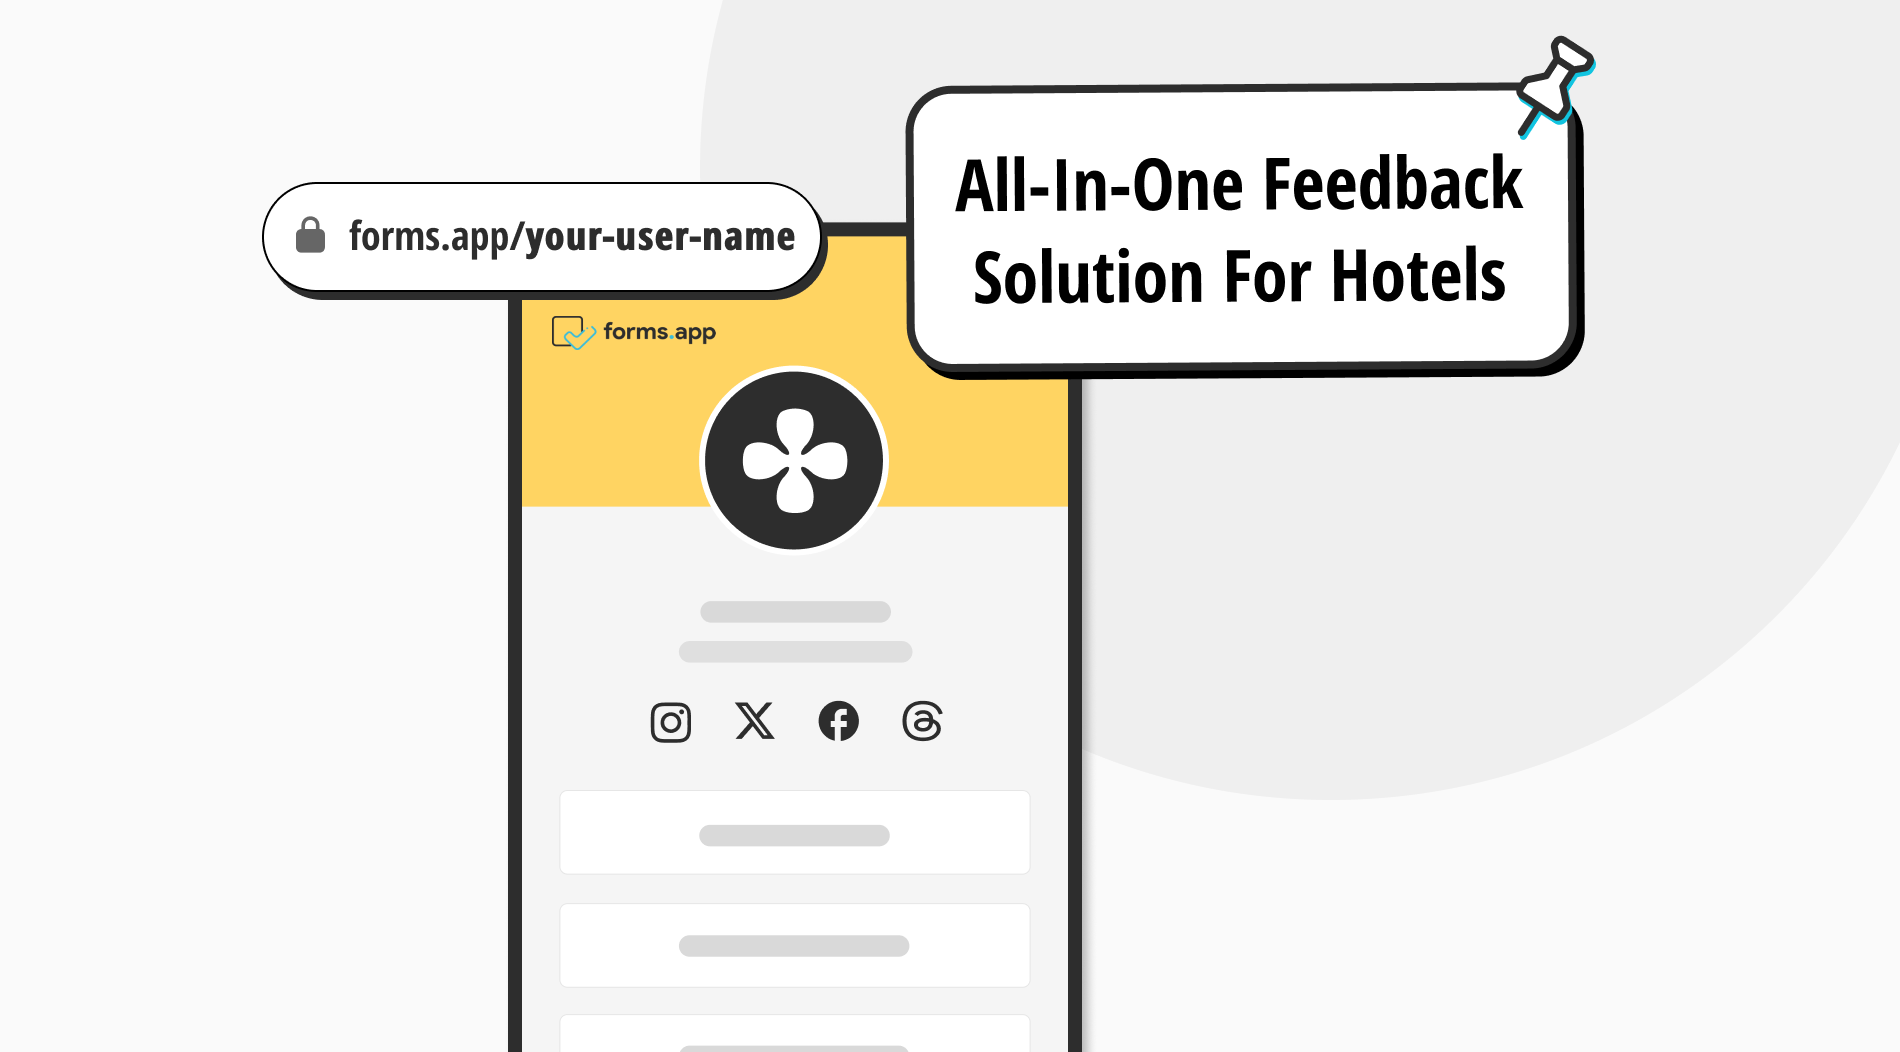 All-in-one feedback solution for hotels